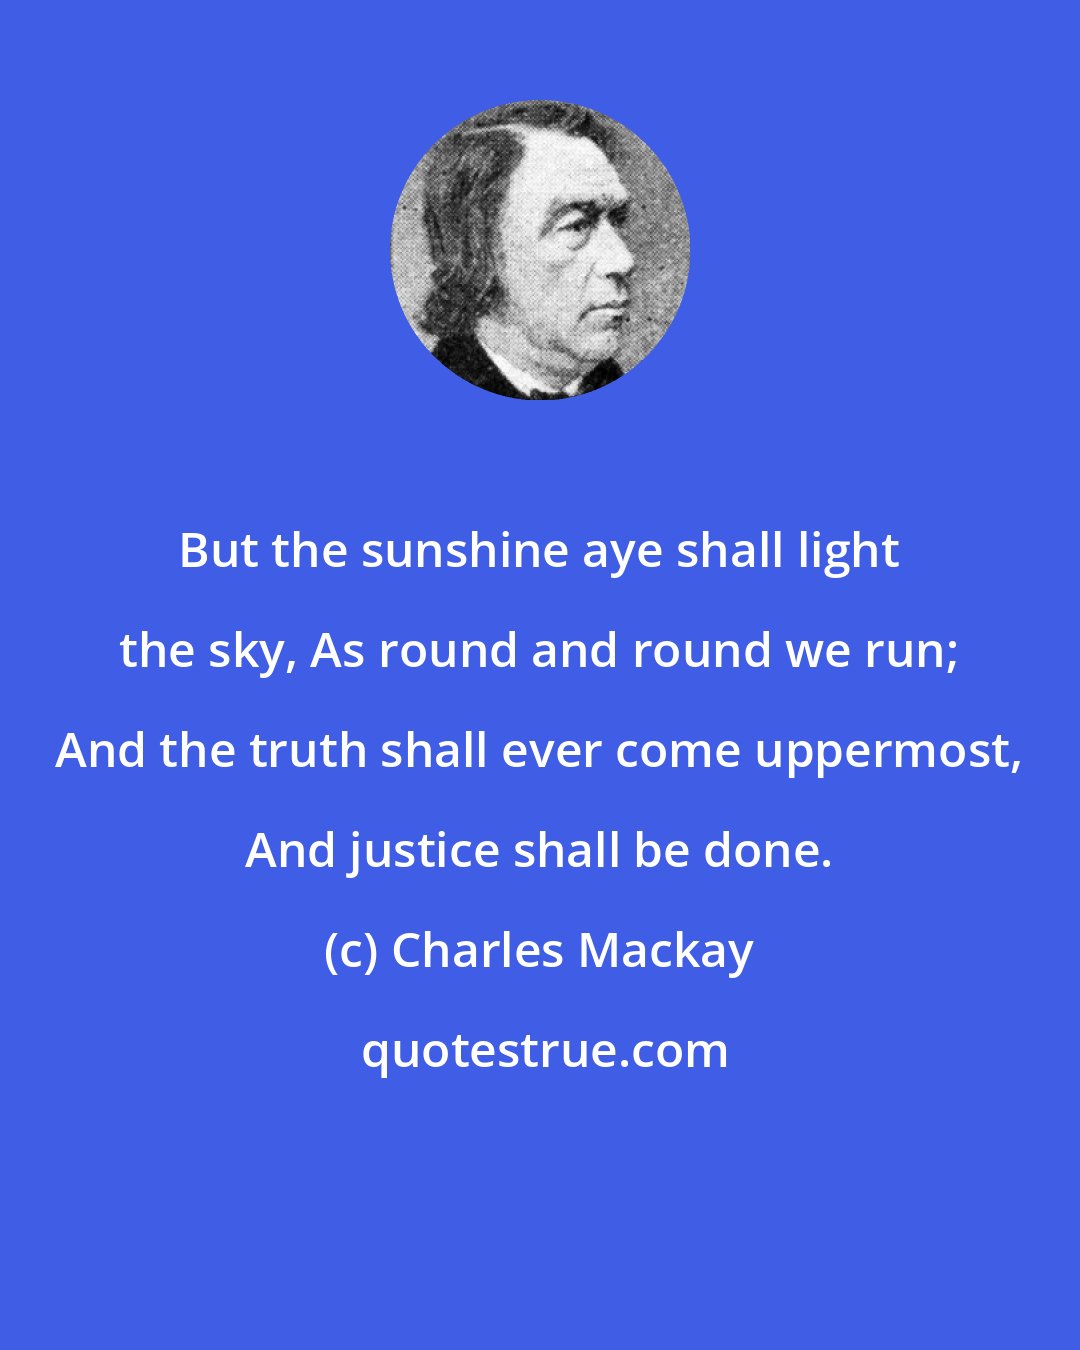 Charles Mackay: But the sunshine aye shall light the sky, As round and round we run; And the truth shall ever come uppermost, And justice shall be done.